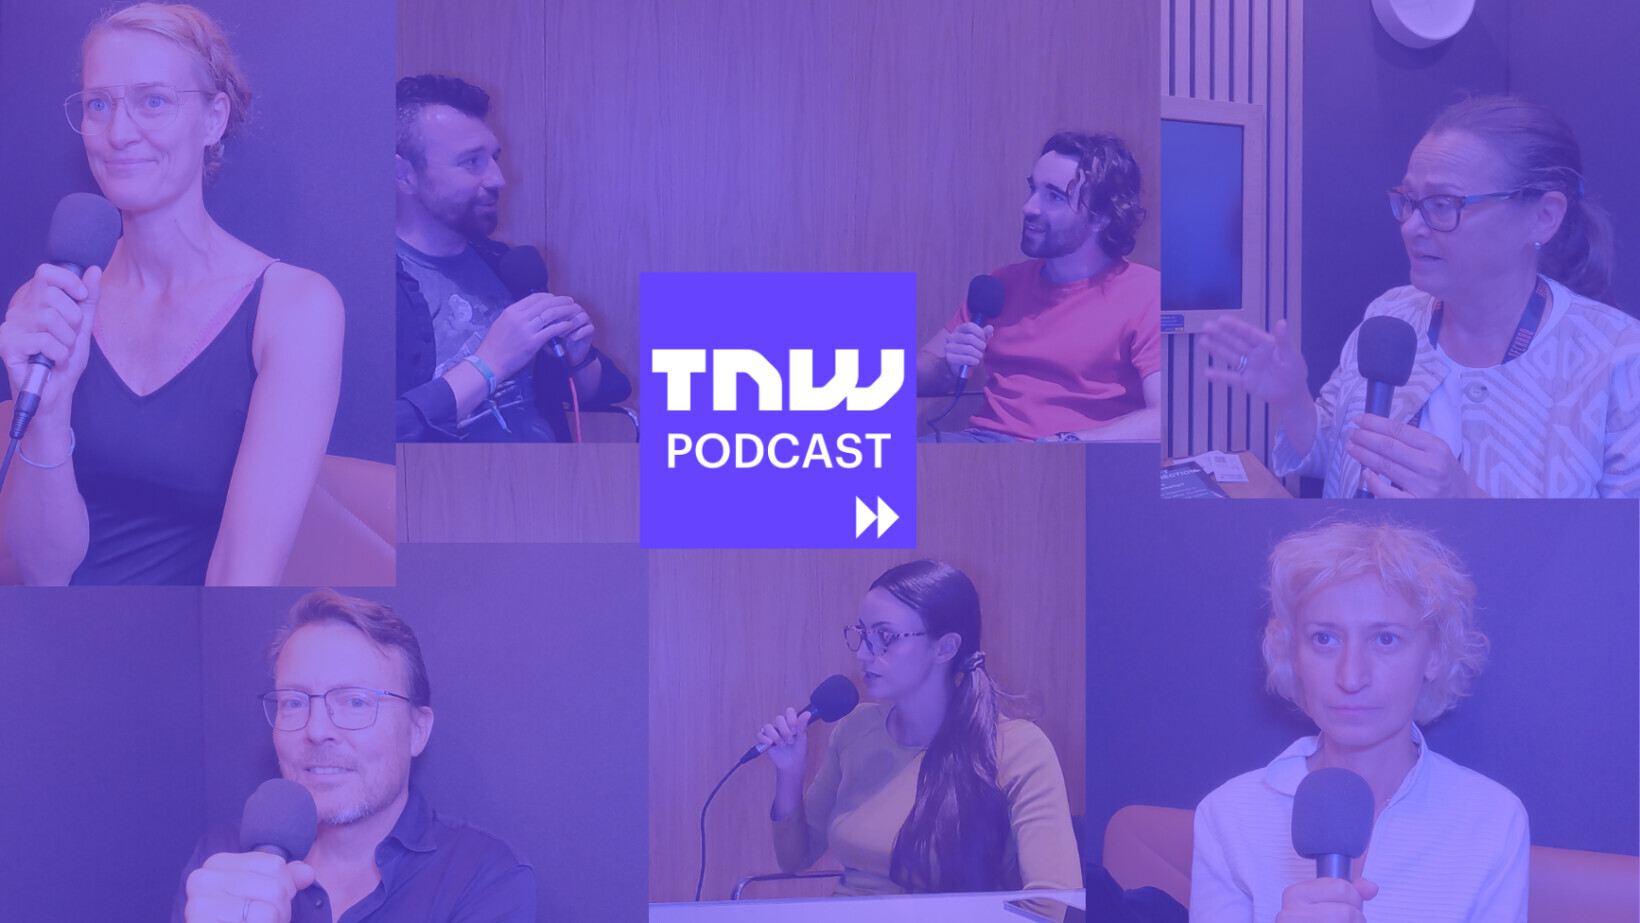 TNW Podcast: Flying cars and invisibility shields; Svilen Rangelov on drones and Dronamics